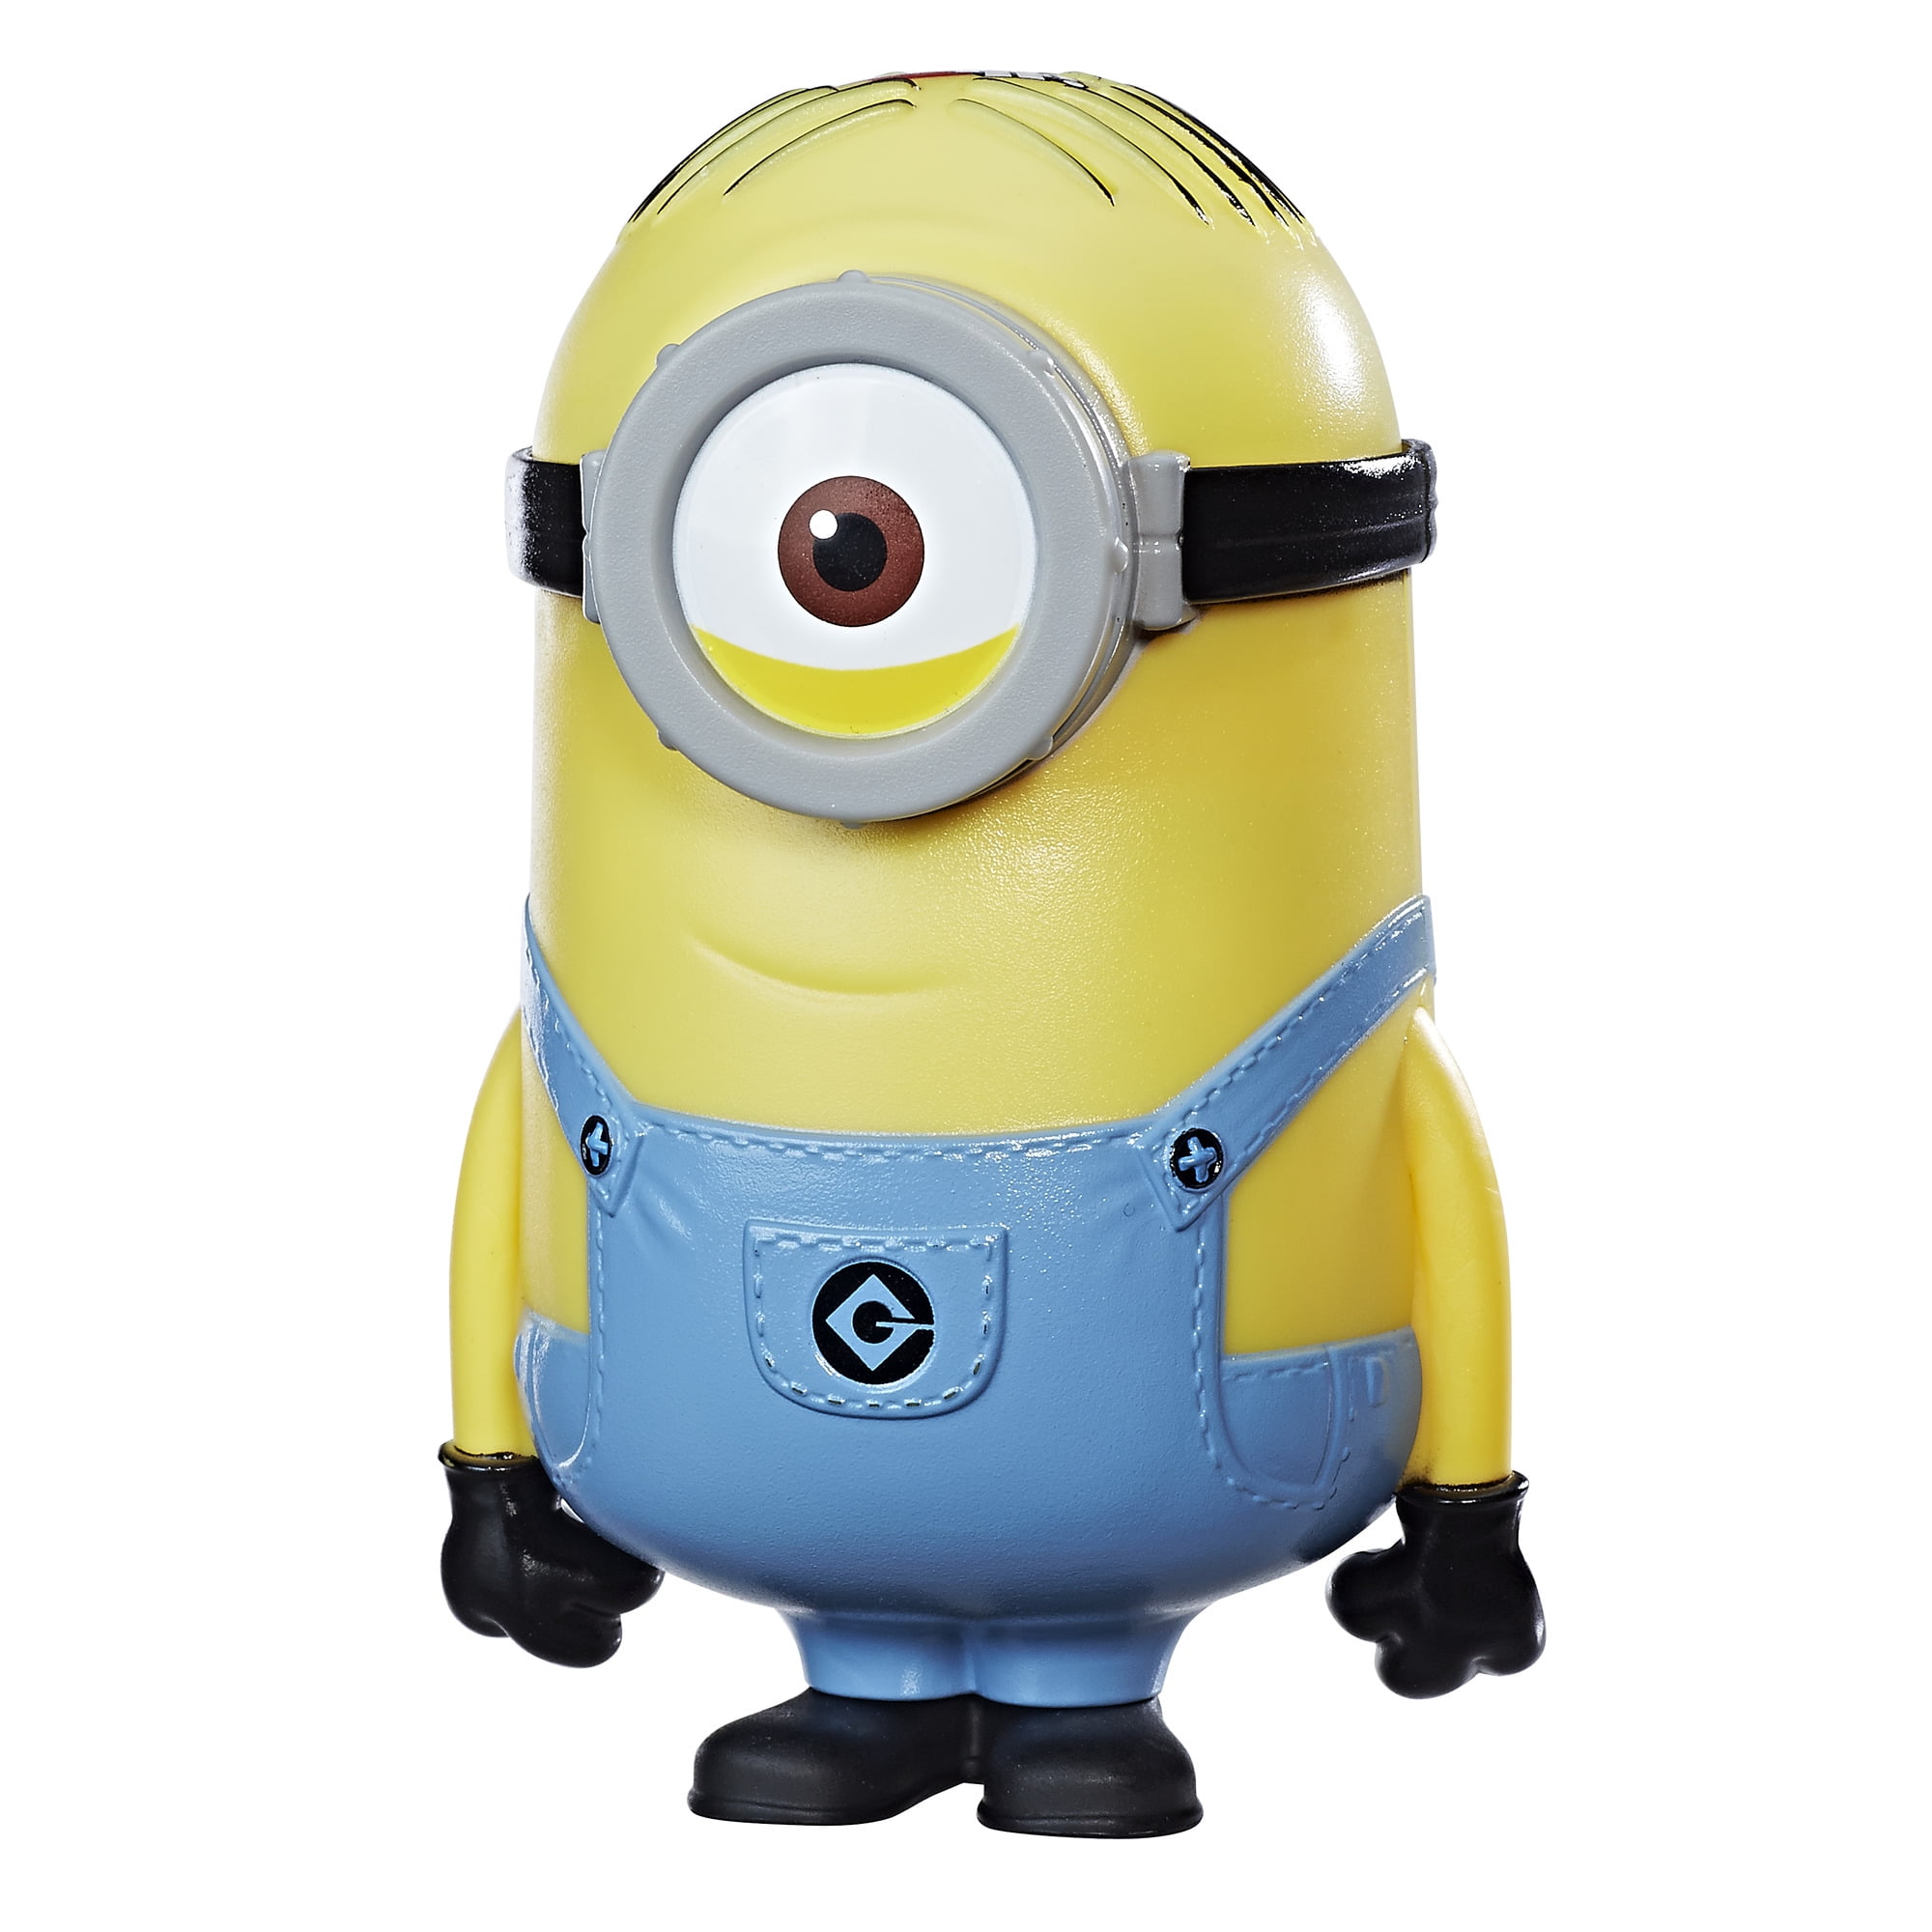 Details about   Set of 16 Minions Baby Kid Child Cake Topper Ornament Figure Figurine US SELLER